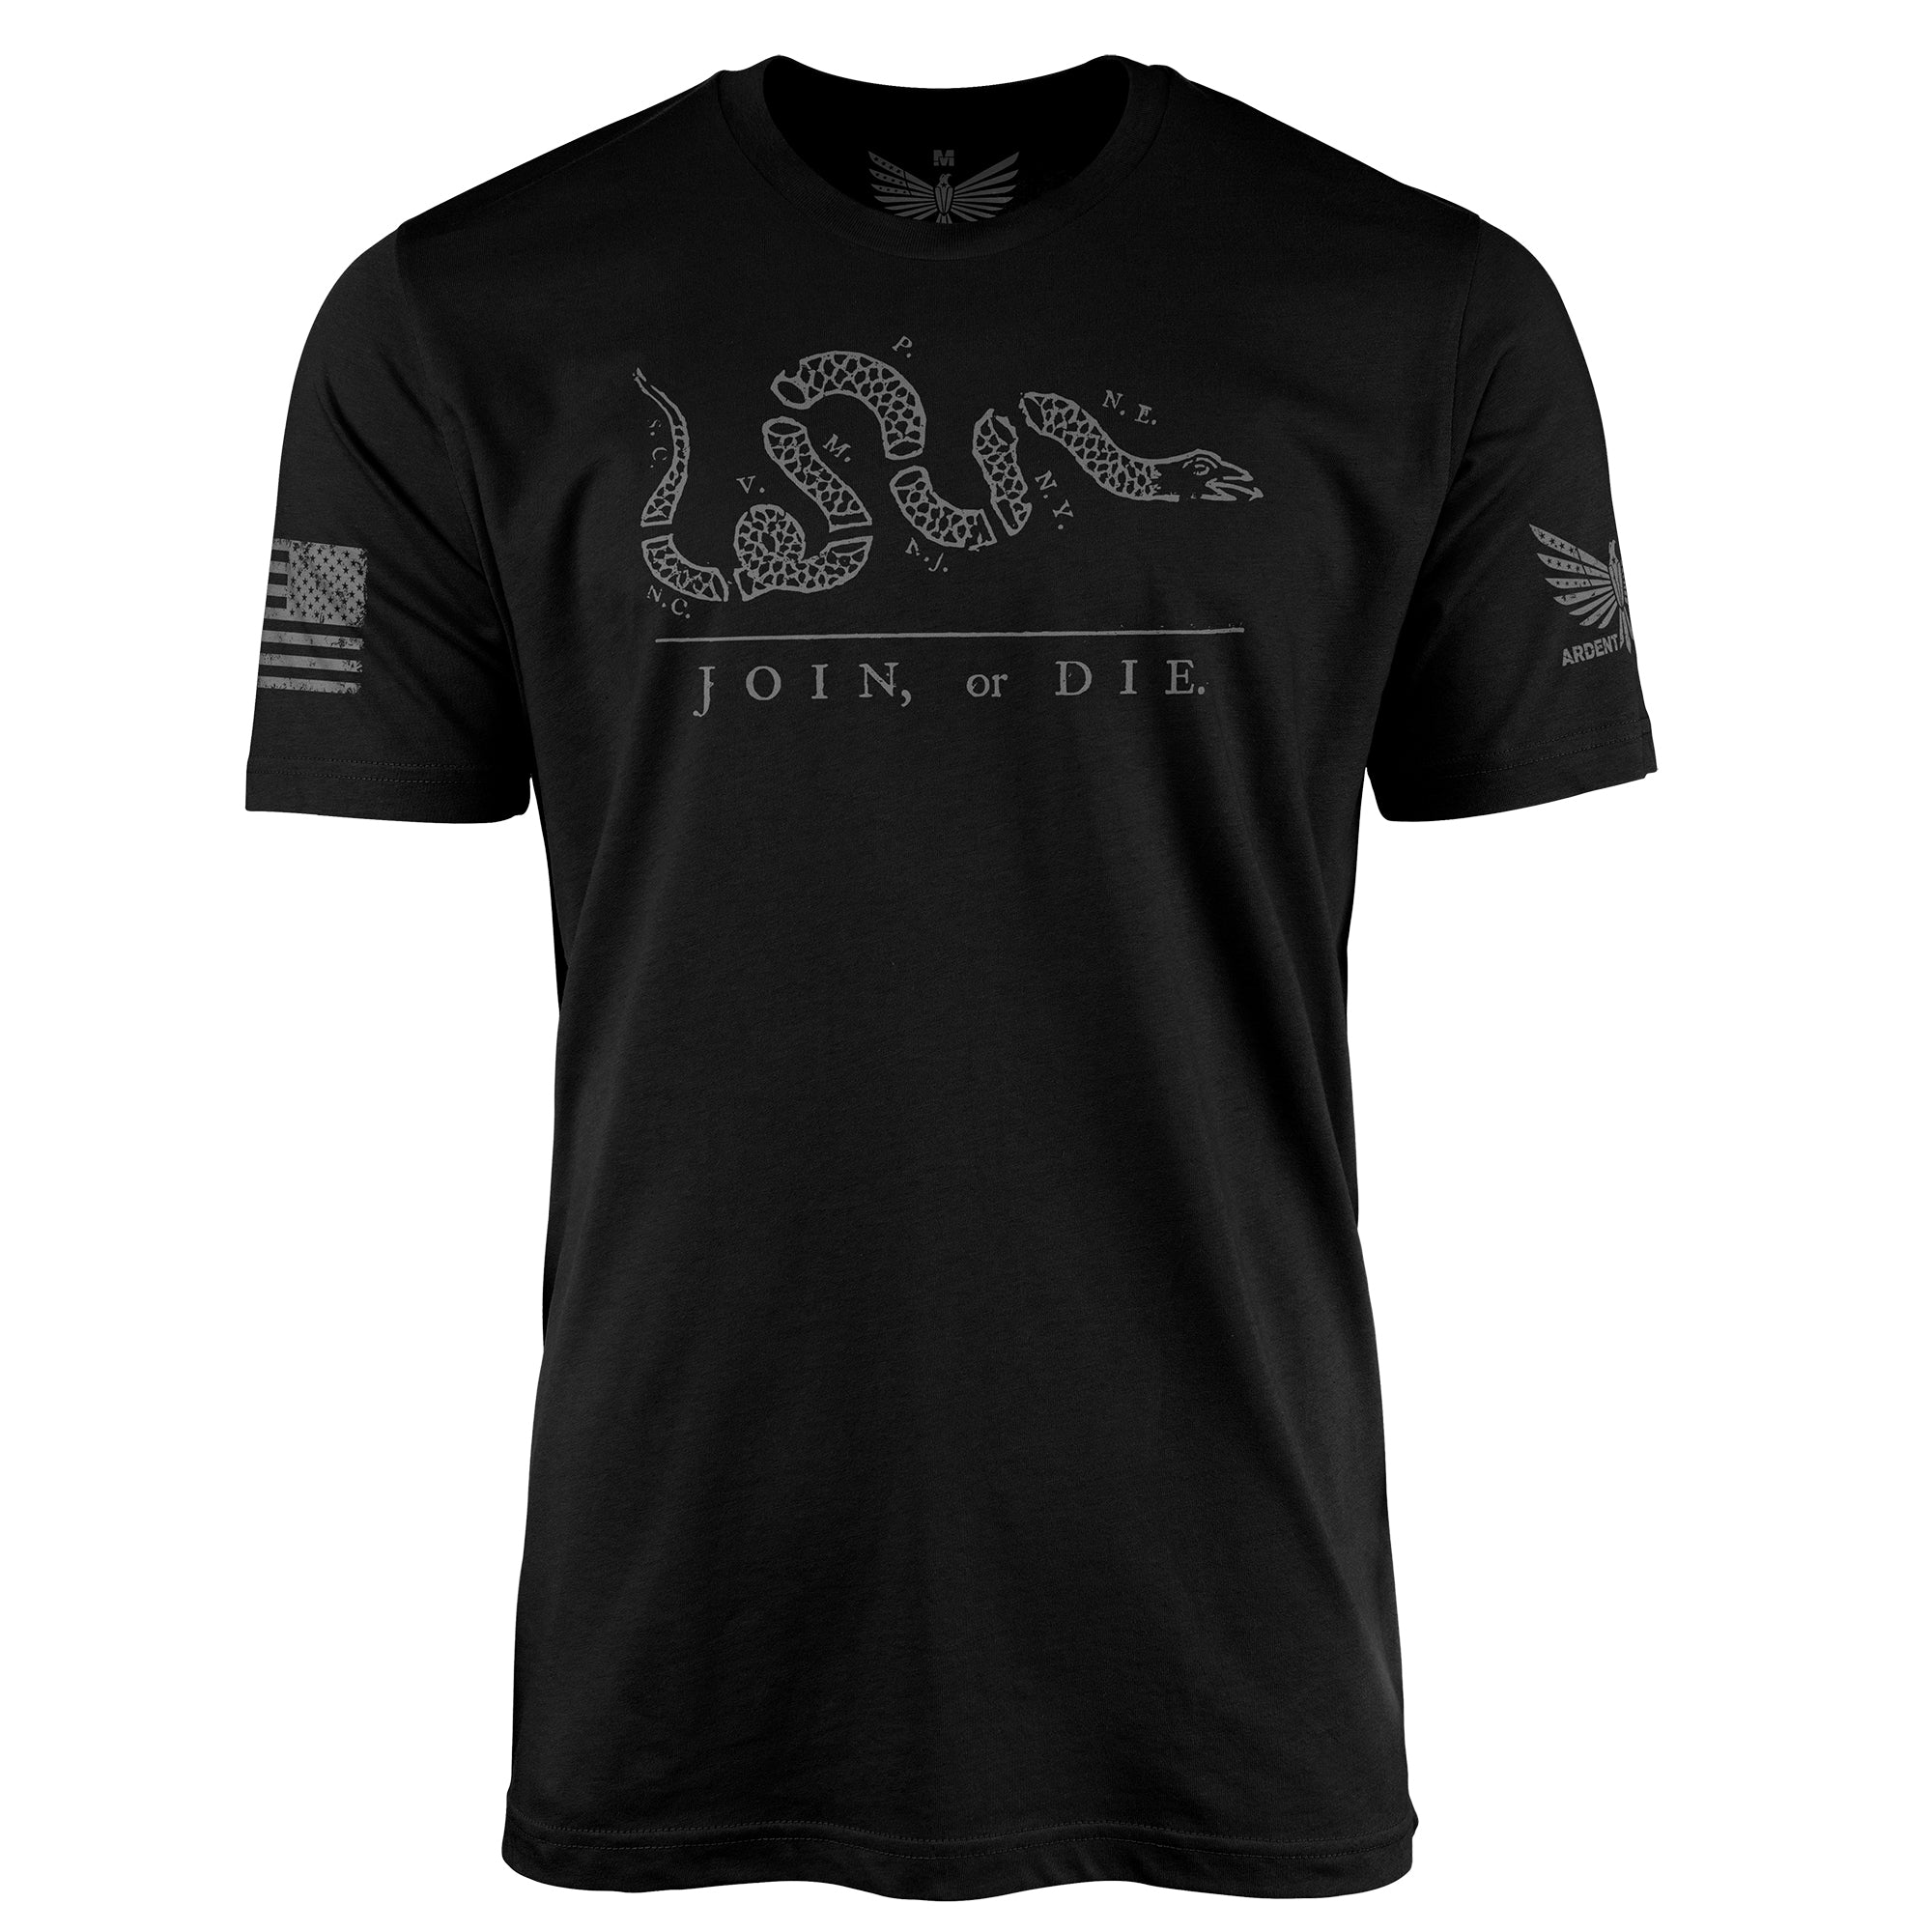 Join or Die-Men's Shirt-S-Ardent Patriot Apparel Co.